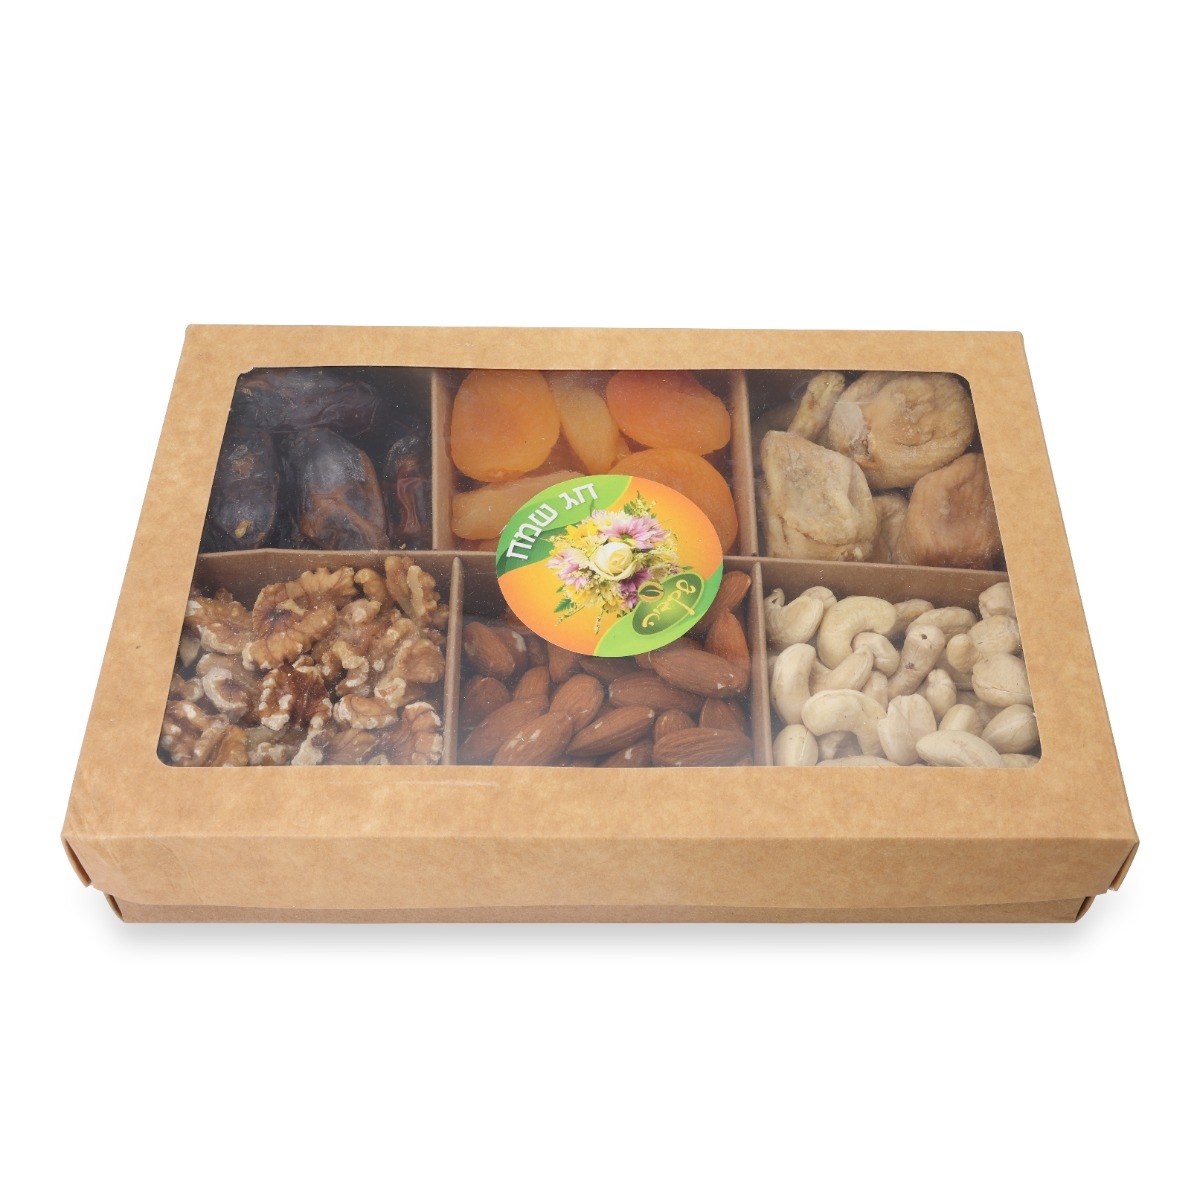 Popular Israeli Dried Fruits and Nuts Collection - 1